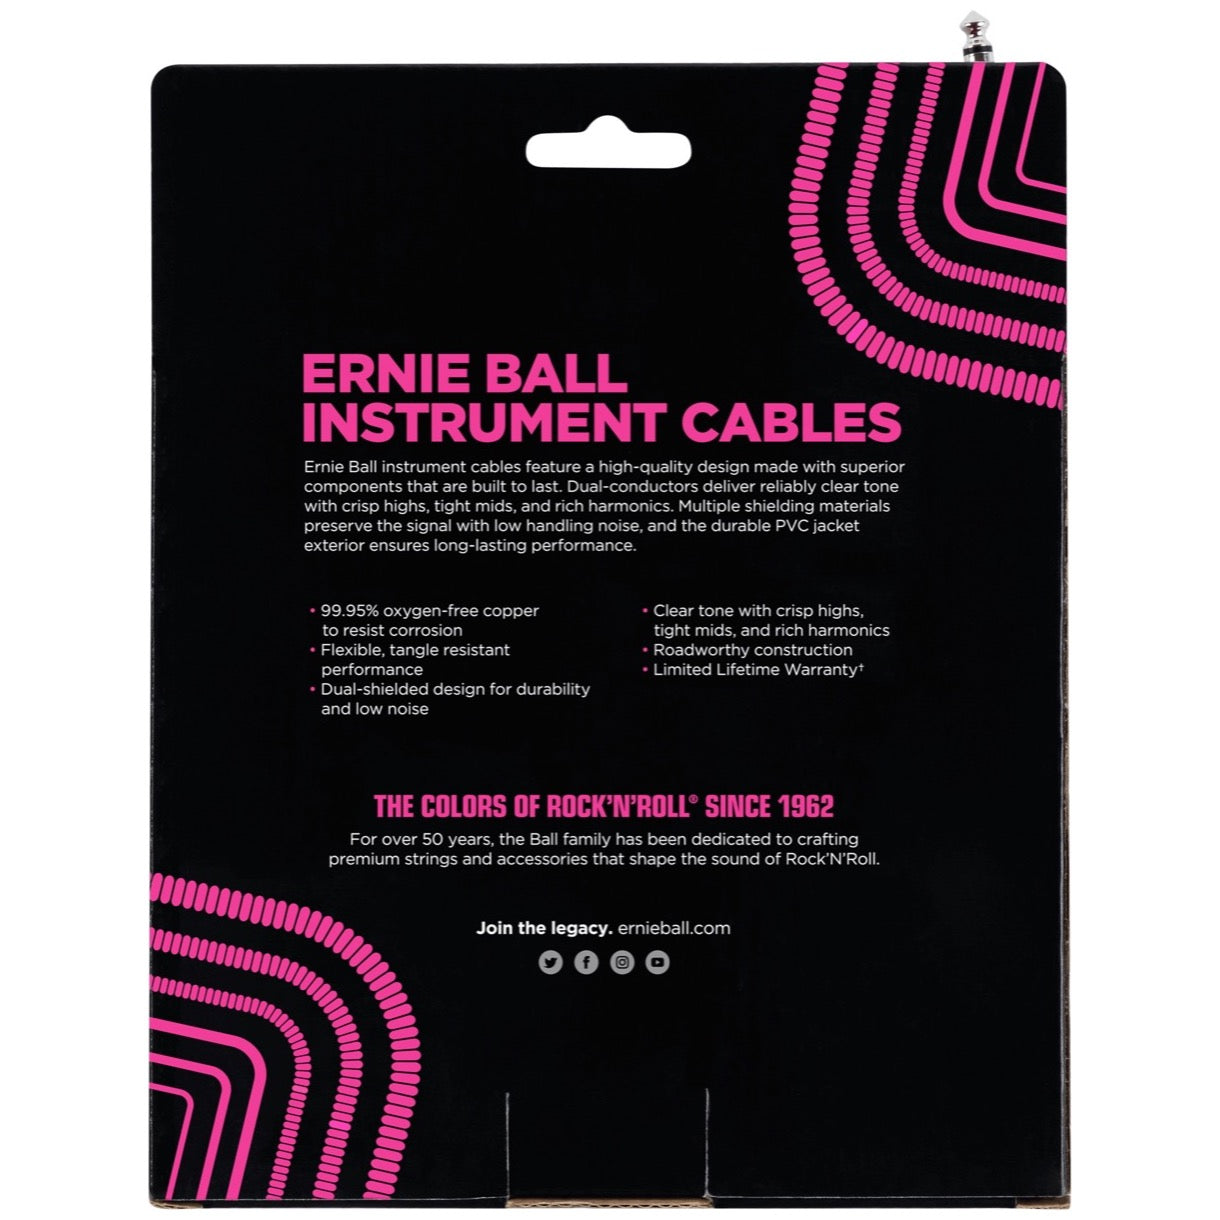 Ernie Ball Coiled Instrument Cable (with One Angled End), 30'